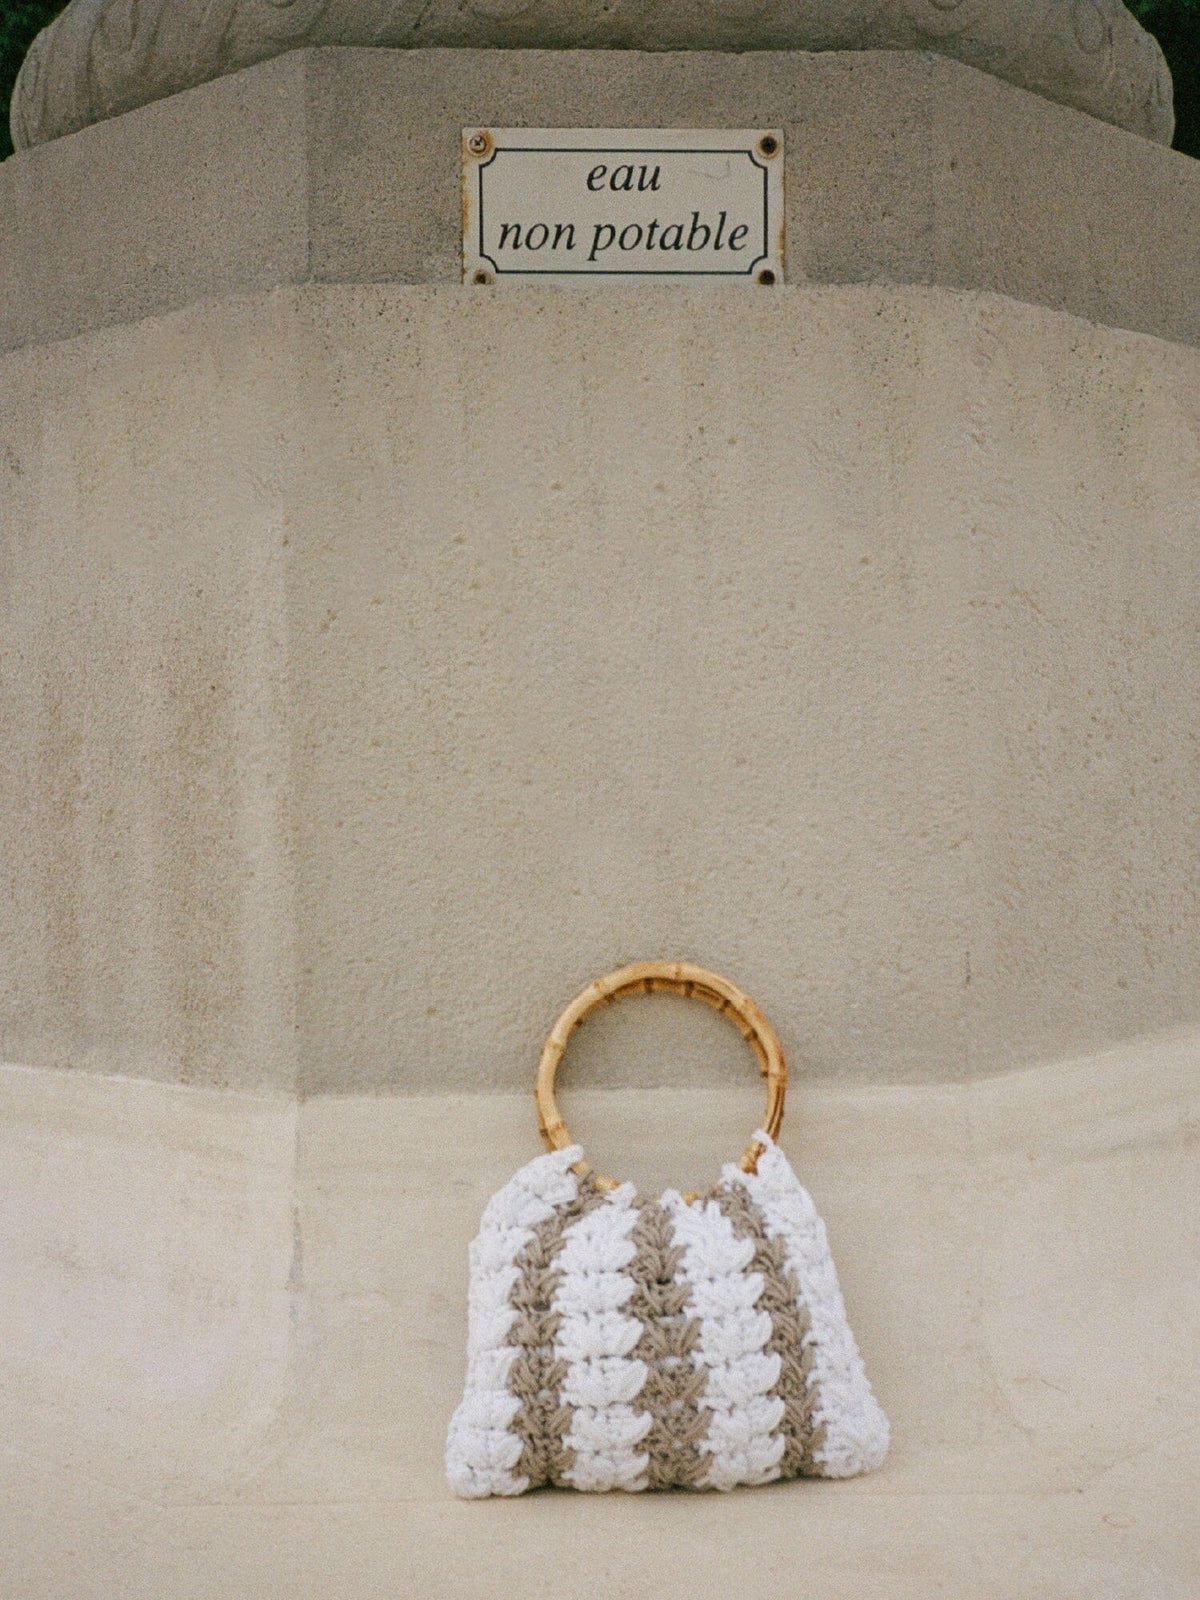 IOS - Small bag with bamboo and macramé handle White and Beige Bag Fête Impériale